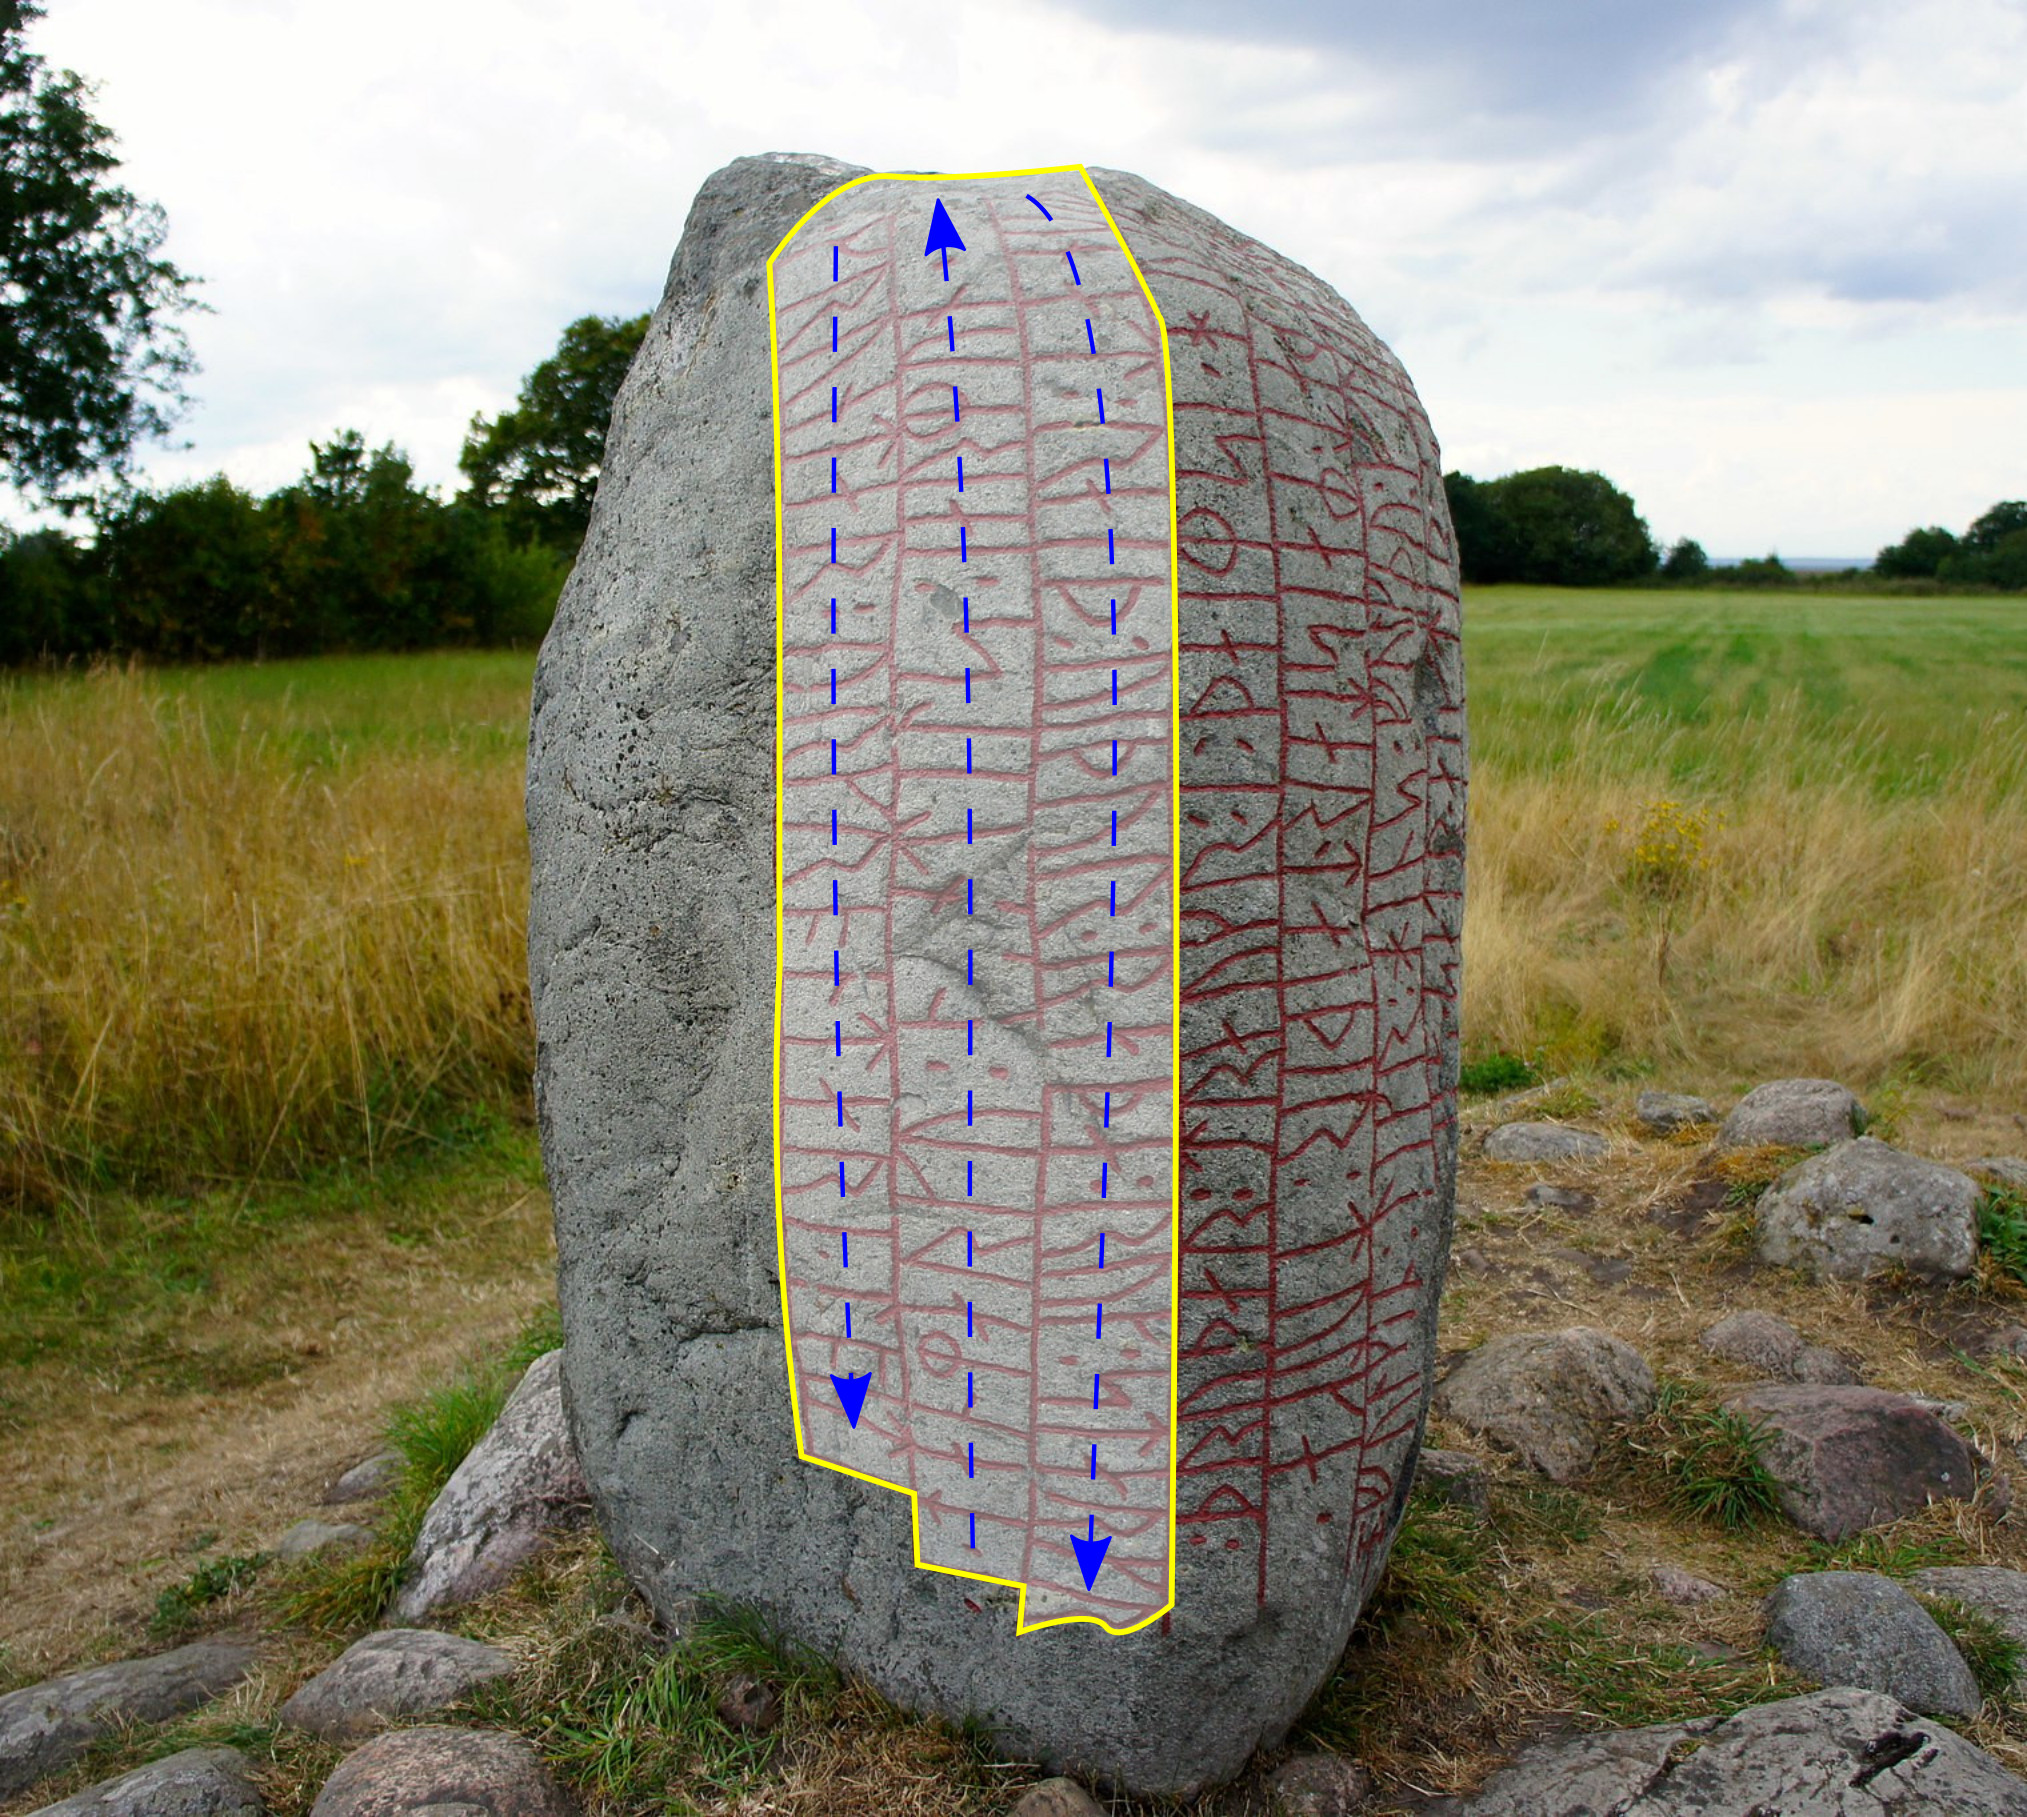 Figure 4: The highlighted section shows the second half of the strophe. Karlevi runestone by Jochka, licensed under CC BY-SA 3.0. Highlighting by Heather O’Donoghue, Matthew Roby, and Yegor Grebnev.